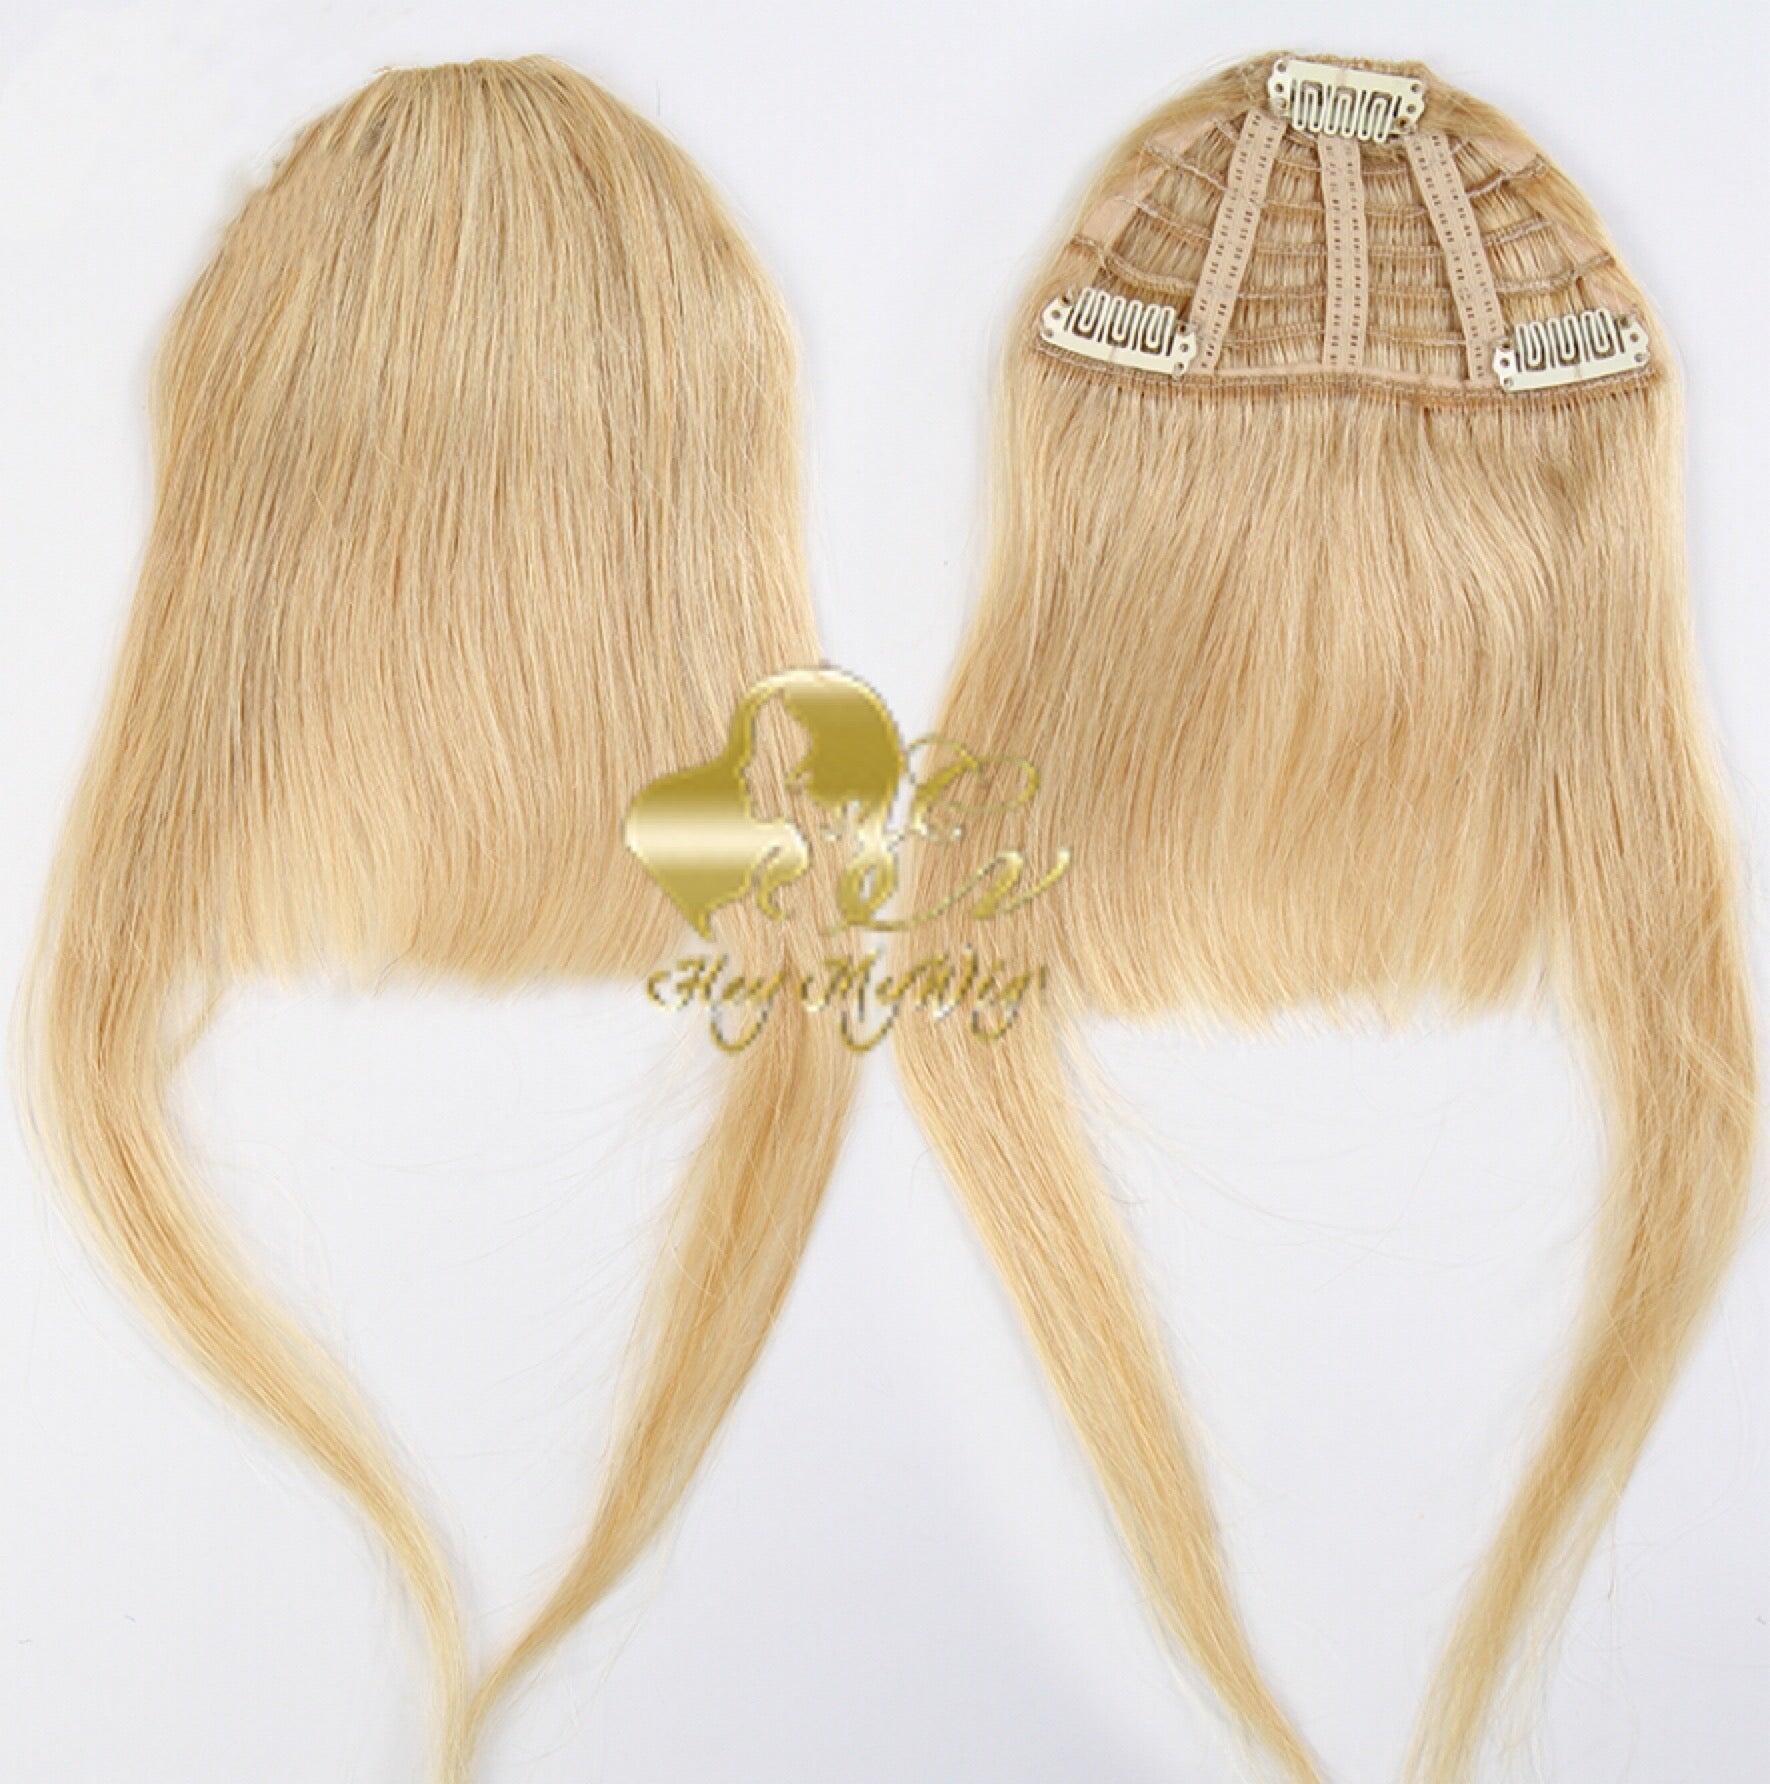 Human hair extension clip-in bangs in #613 blonde for black girls - heymywig.com